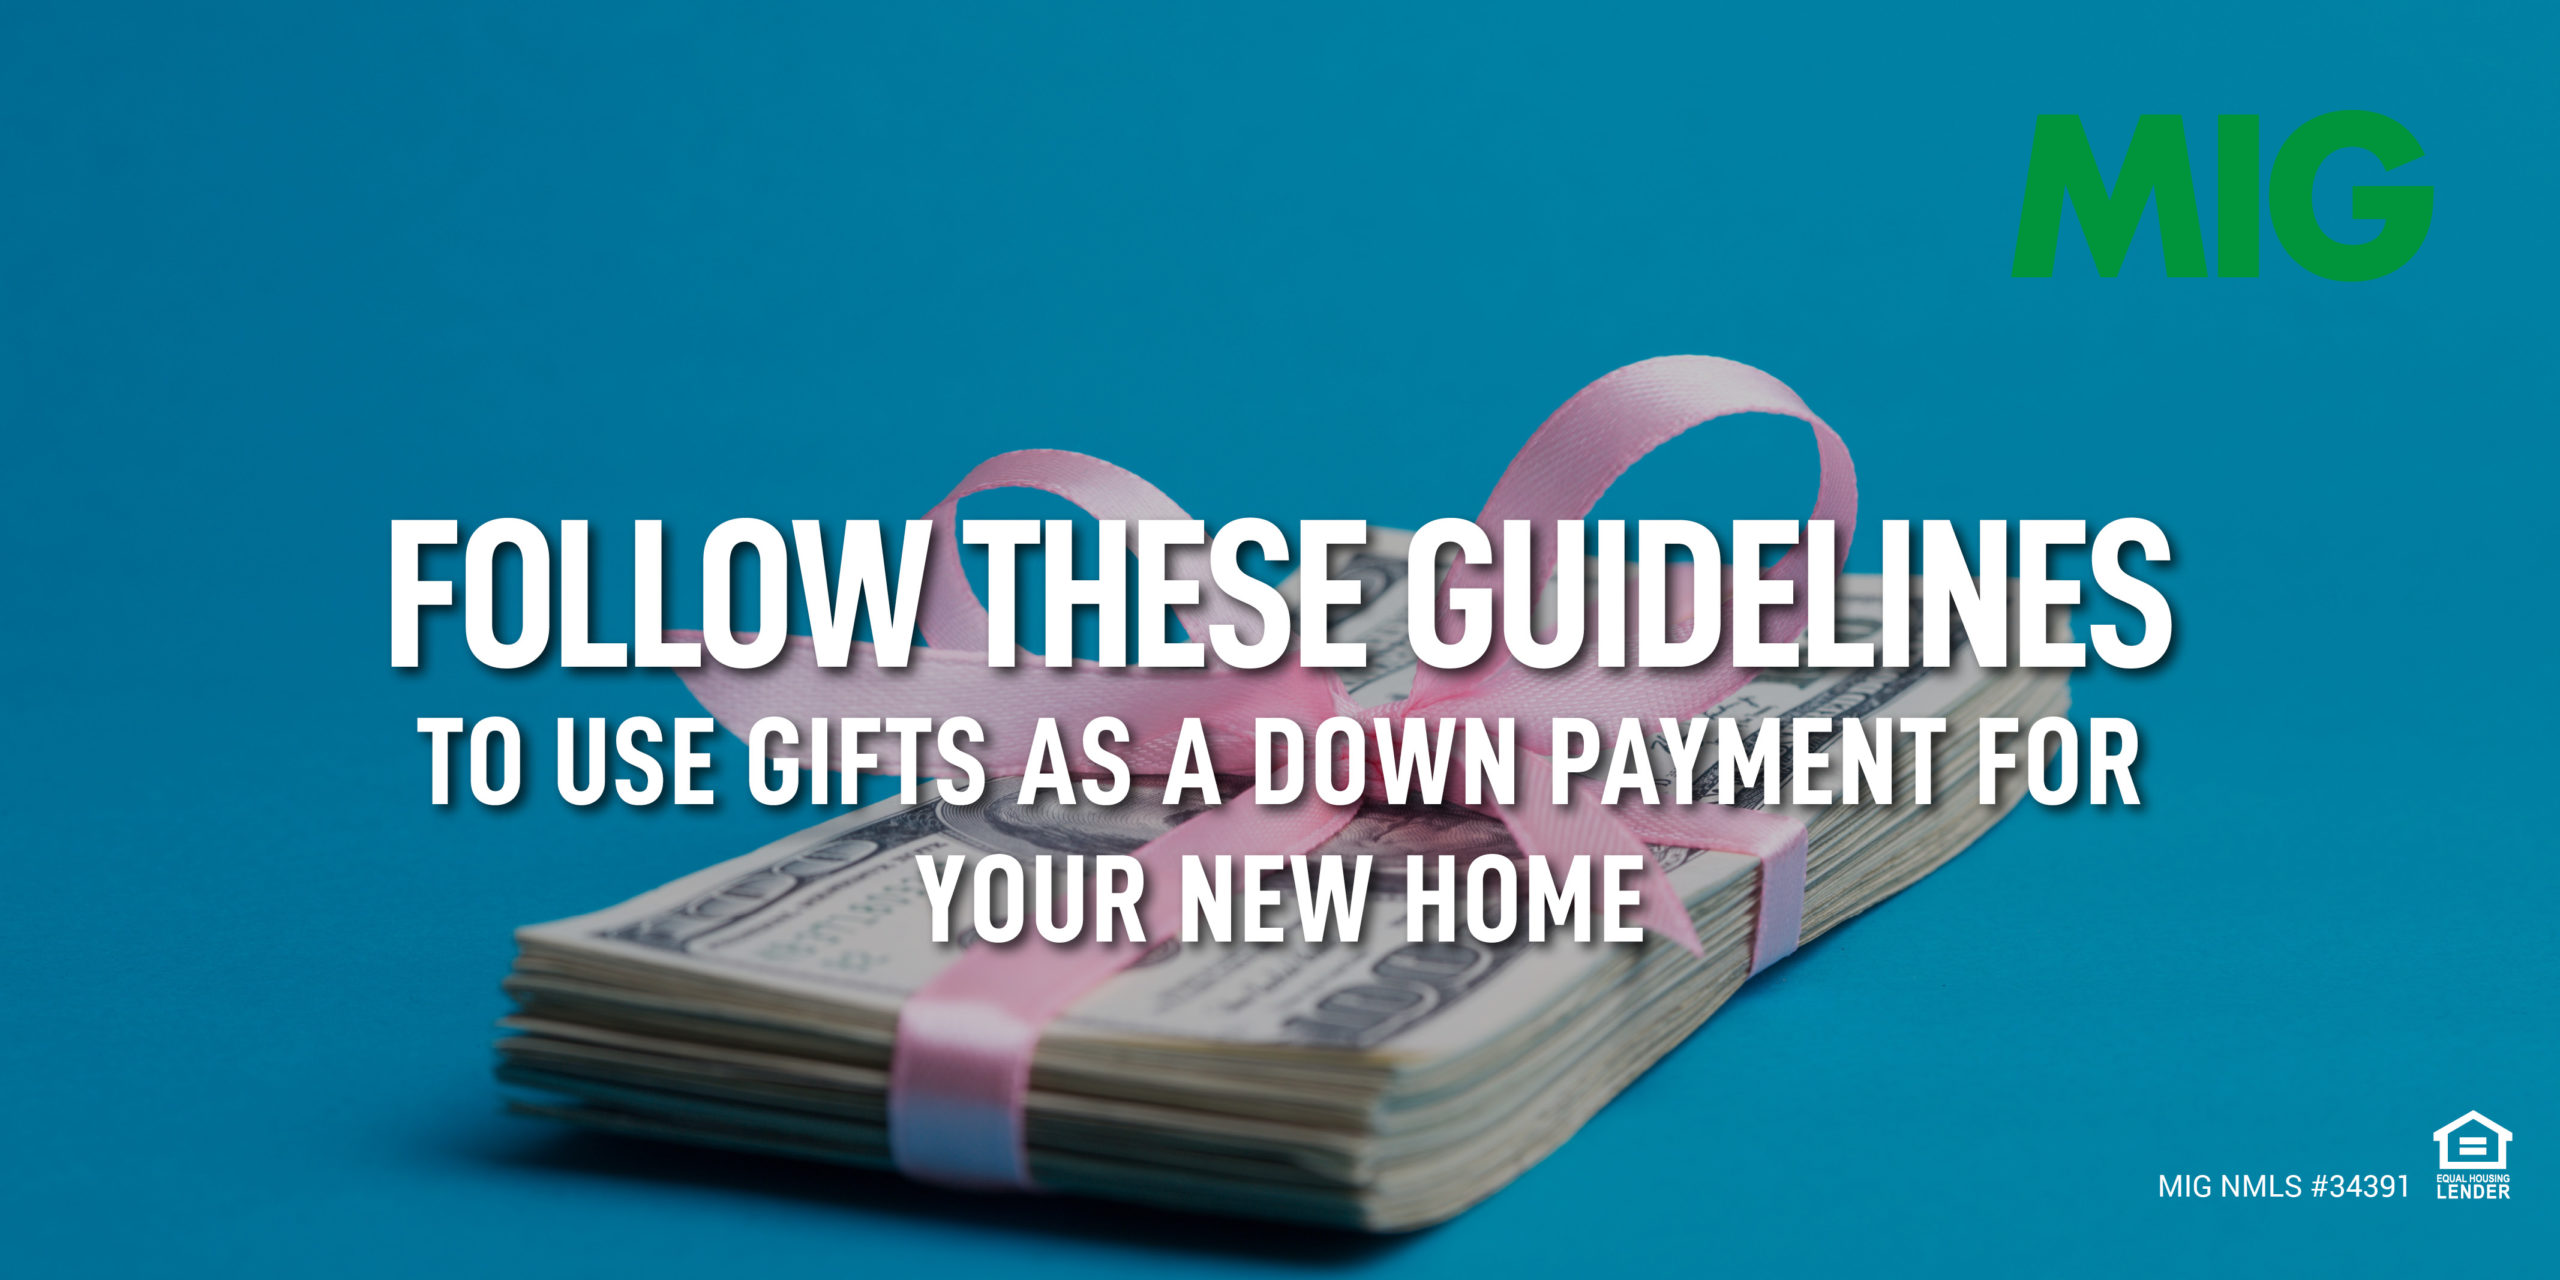 Follow These Guidelines to Use Gifts as a Down Payment for Your New Home